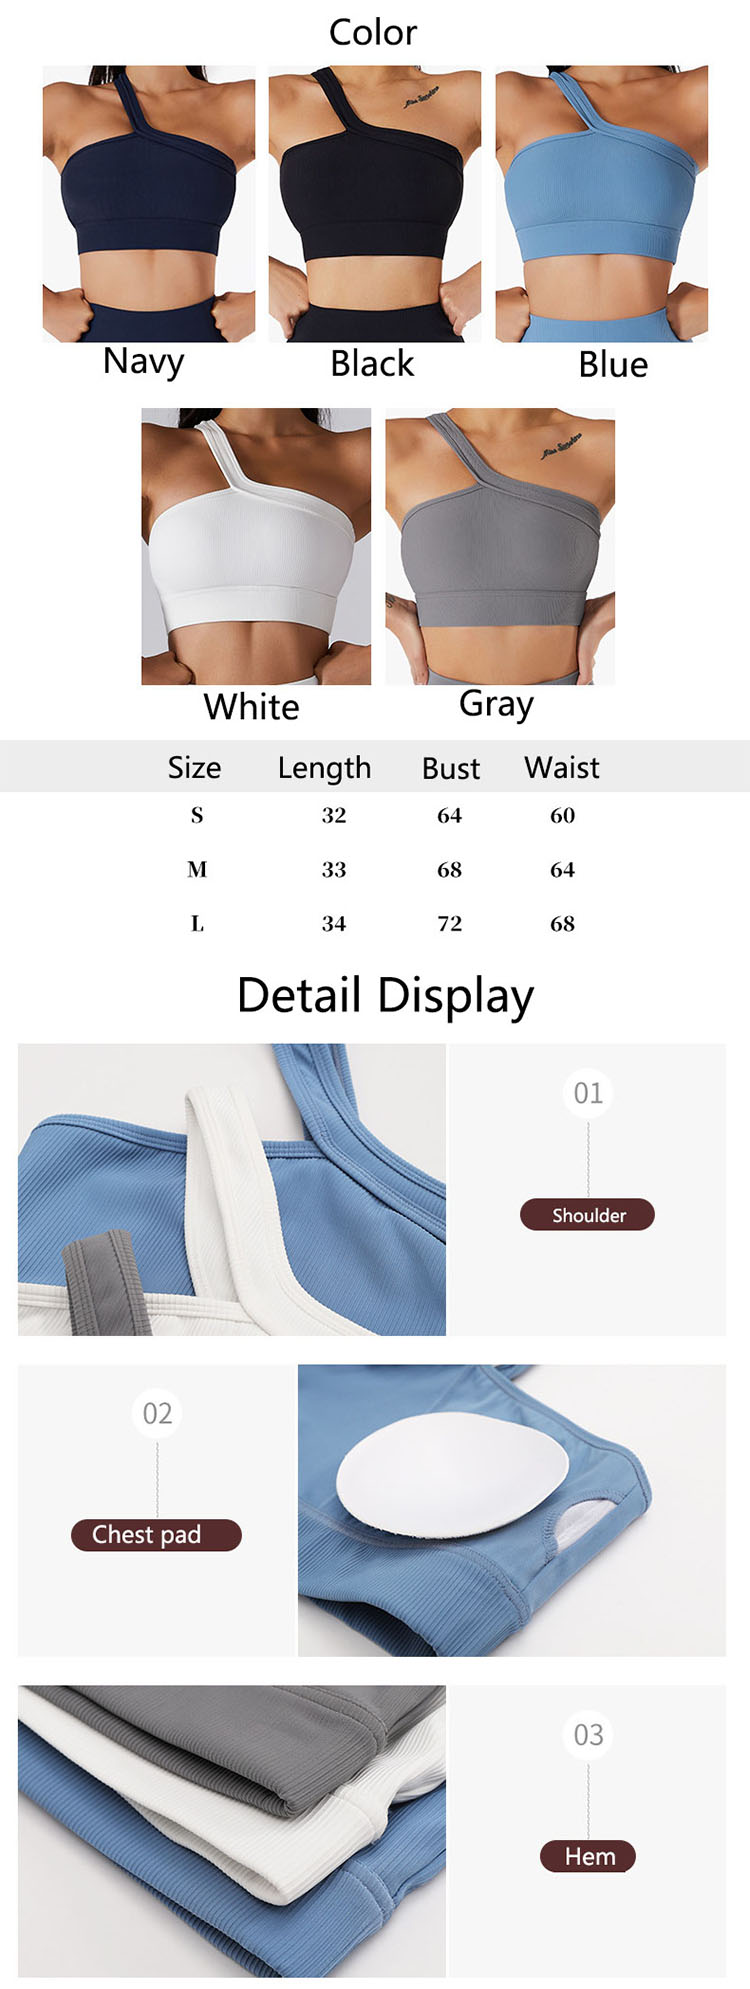 With the popularity of crop tops and bra tops, full figure sports bra